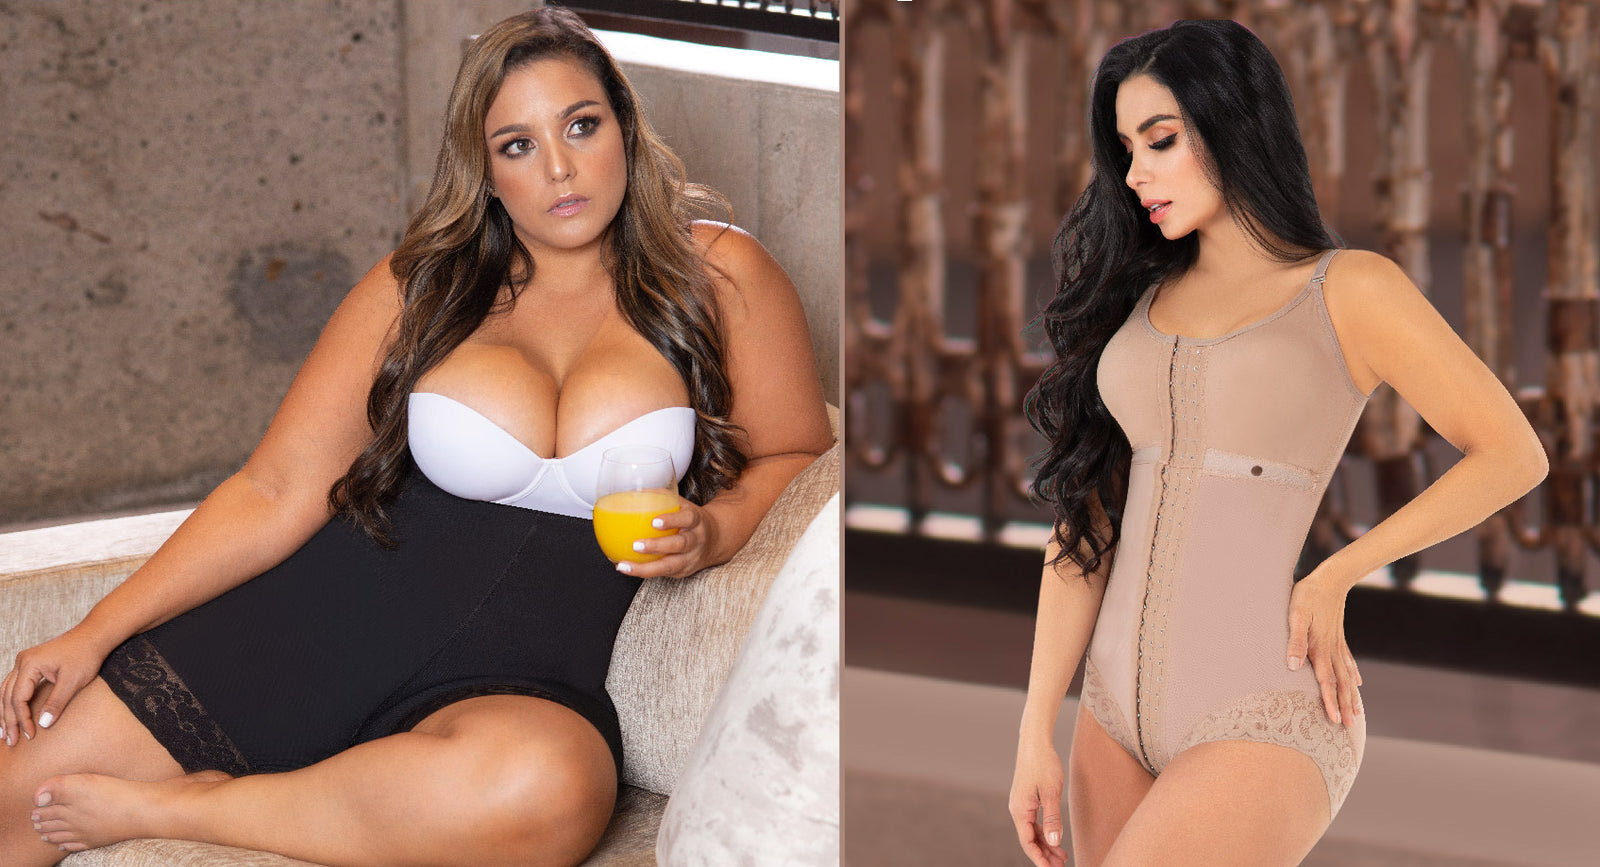 4 types of bodyshapers and what they can do